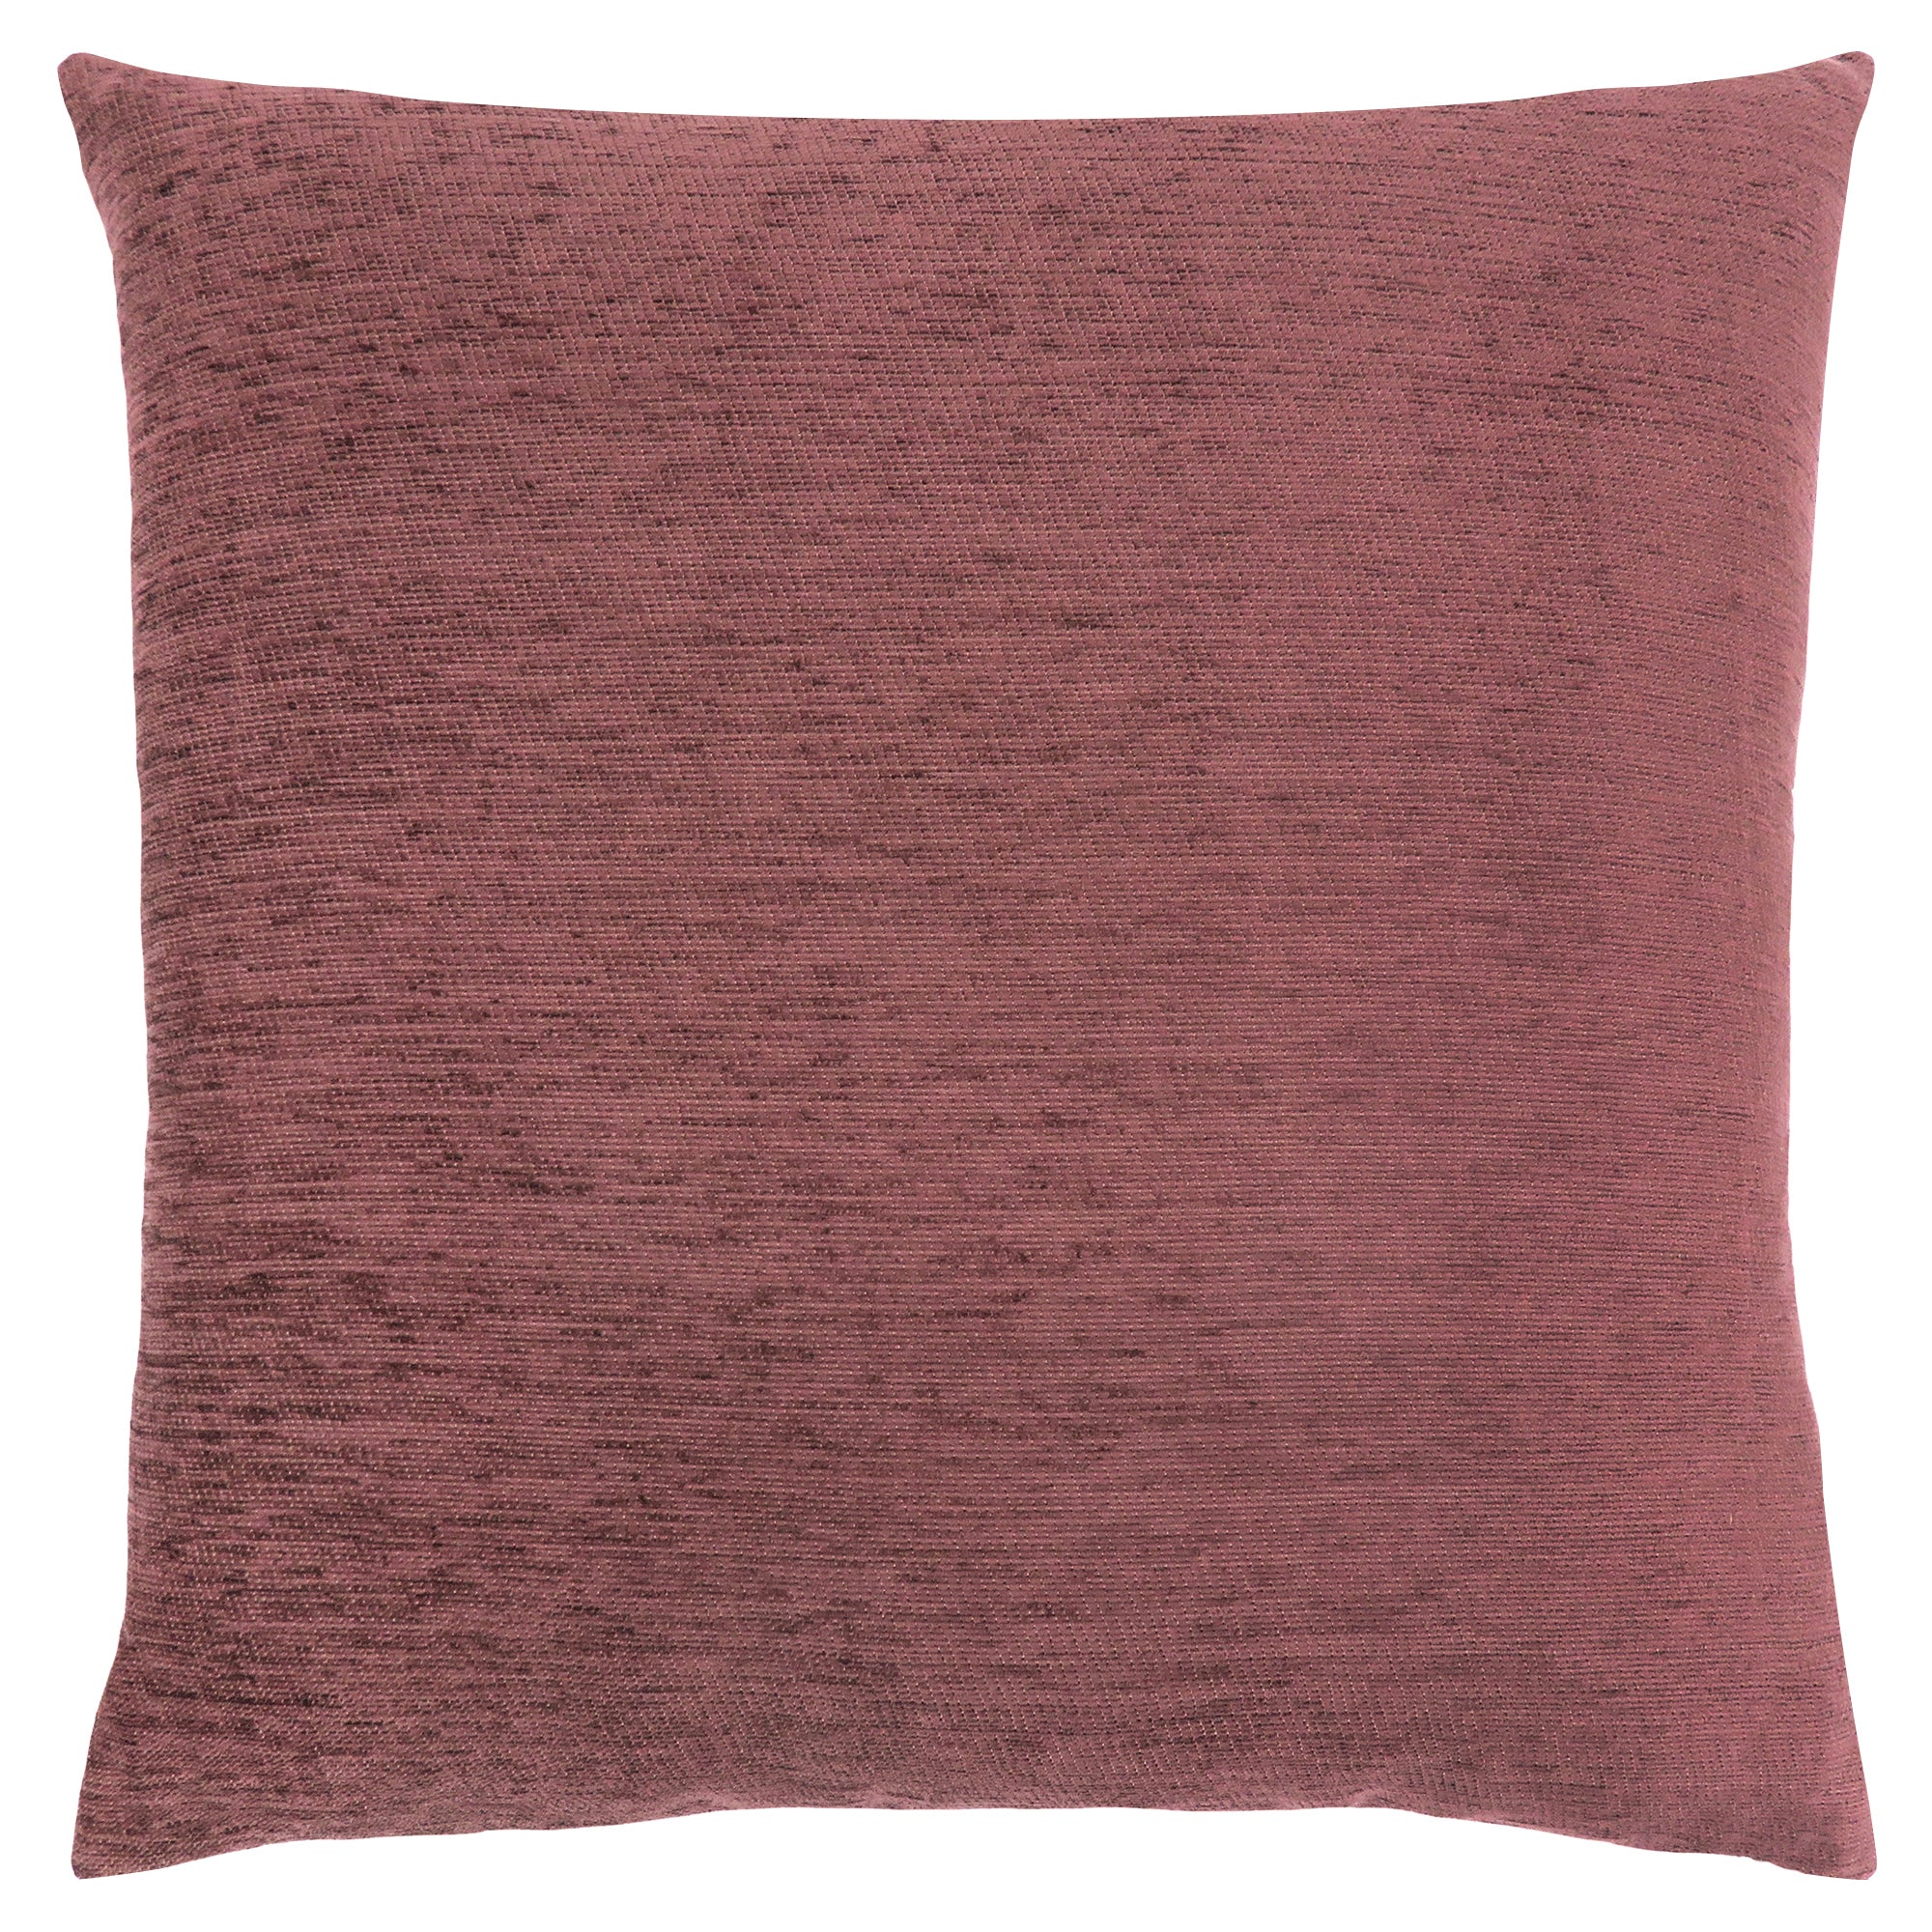 MN-879300    Pillows, 18 X 18 Square, Insert Included, Decorative Throw, Accent, Sofa, Couch, Bed, Soft Polyester Fabric, Hypoallergenic Soft Polyester Insert, Pink, Casual